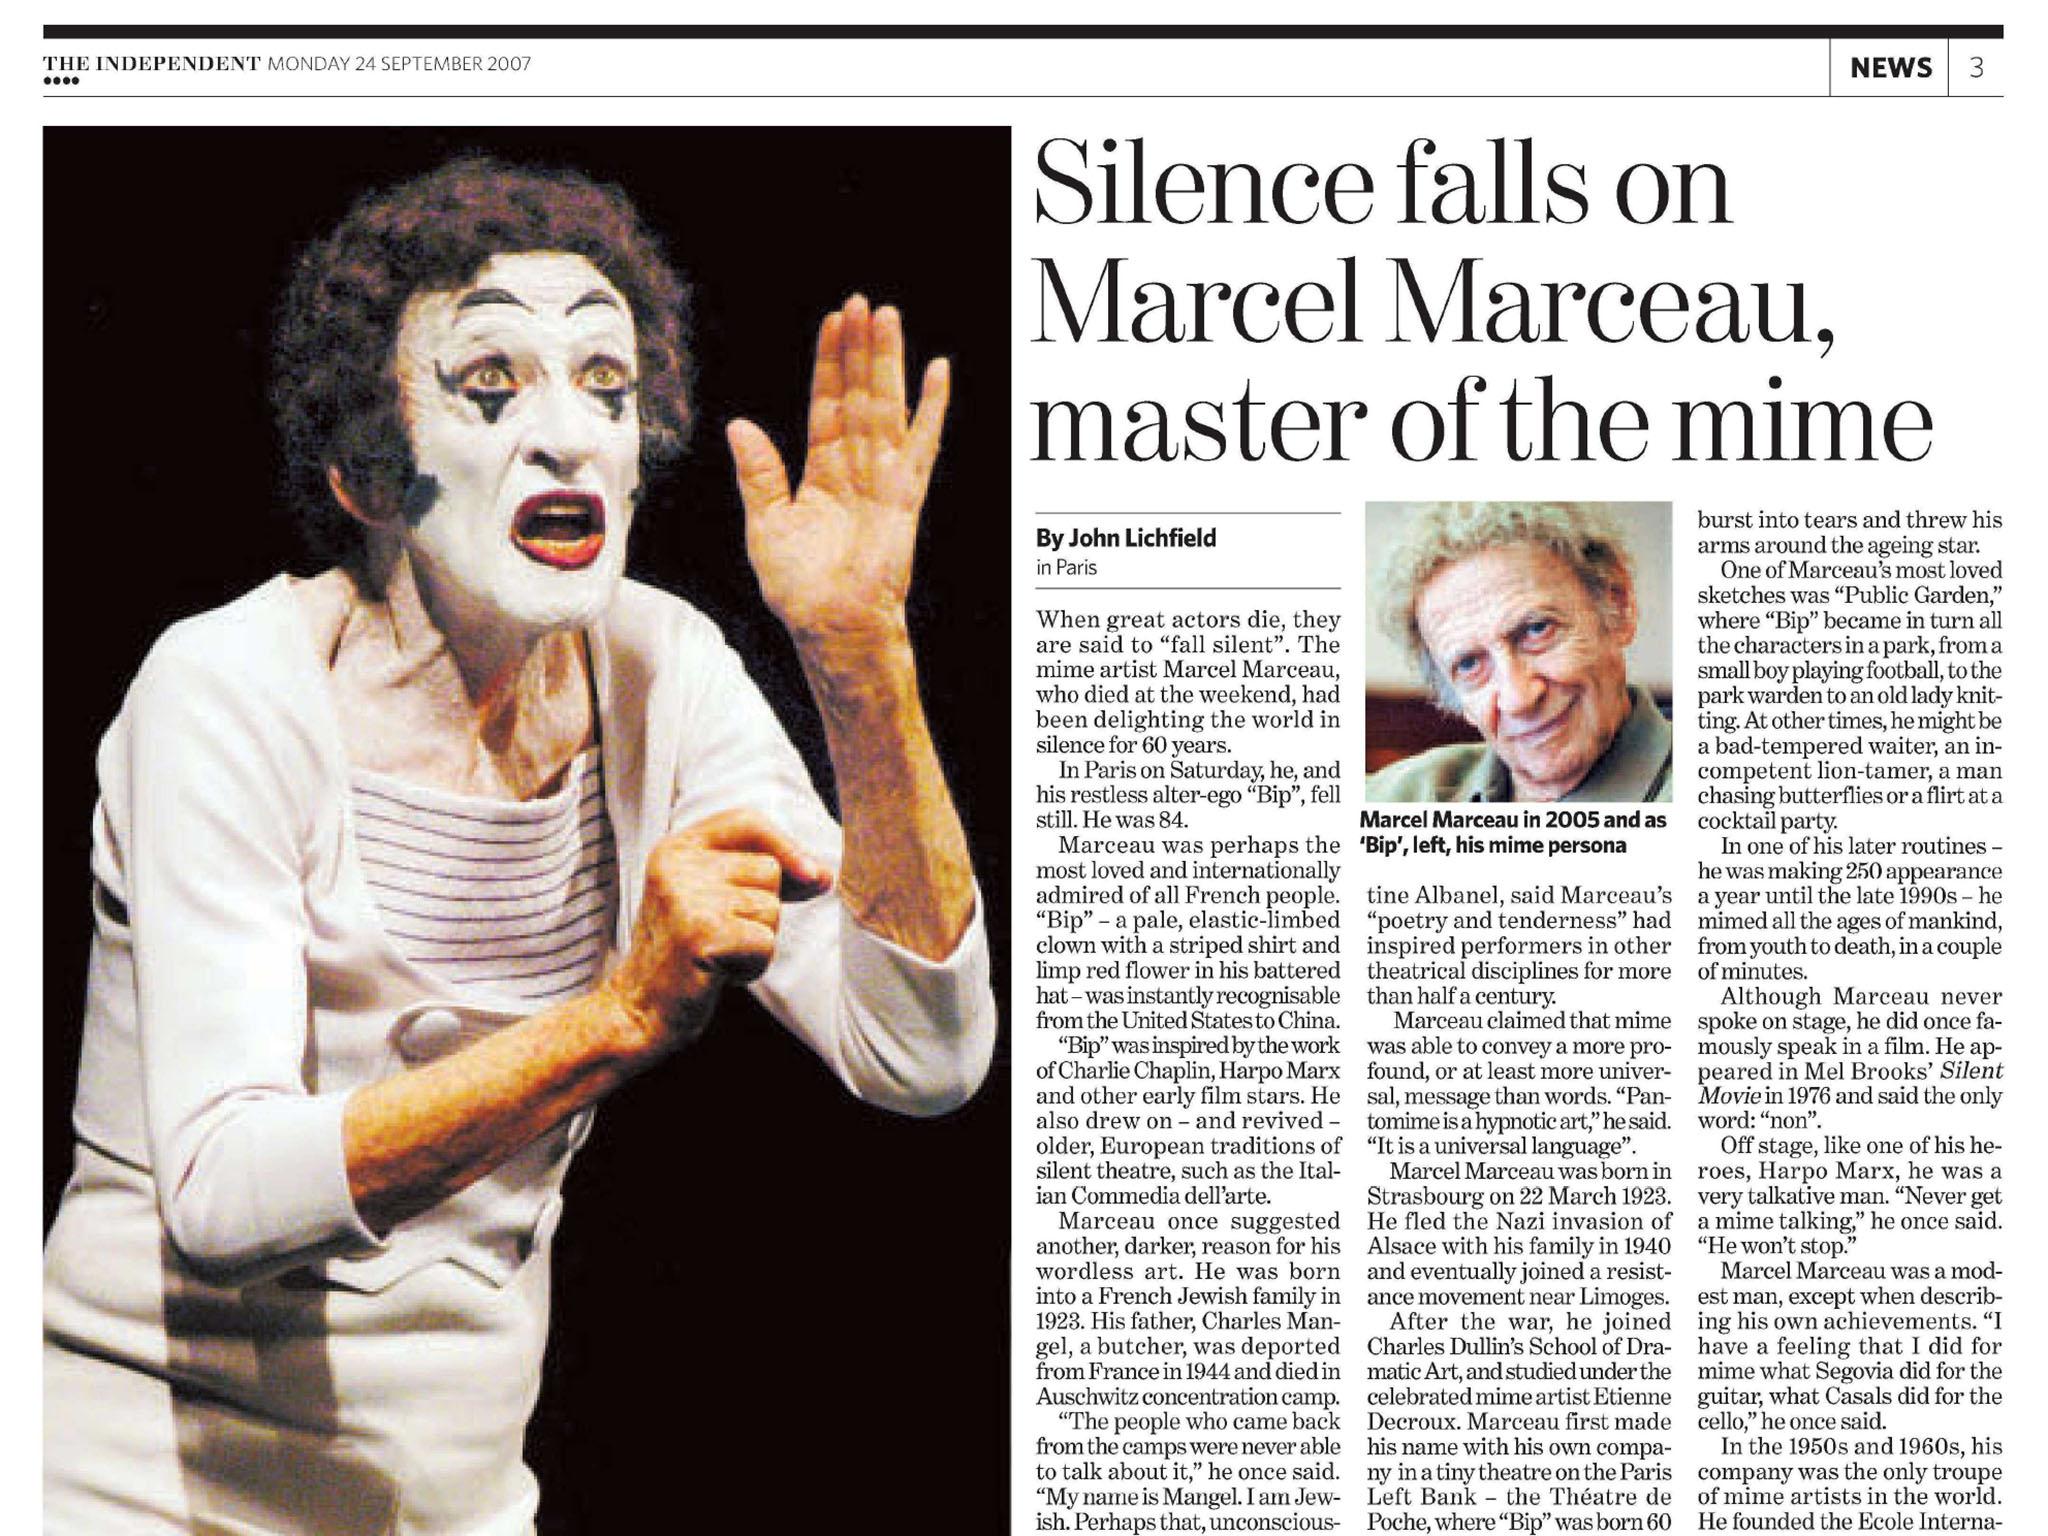 The Independent reports the death of Marcel Marceau on 24 September 2007 (The Independent)